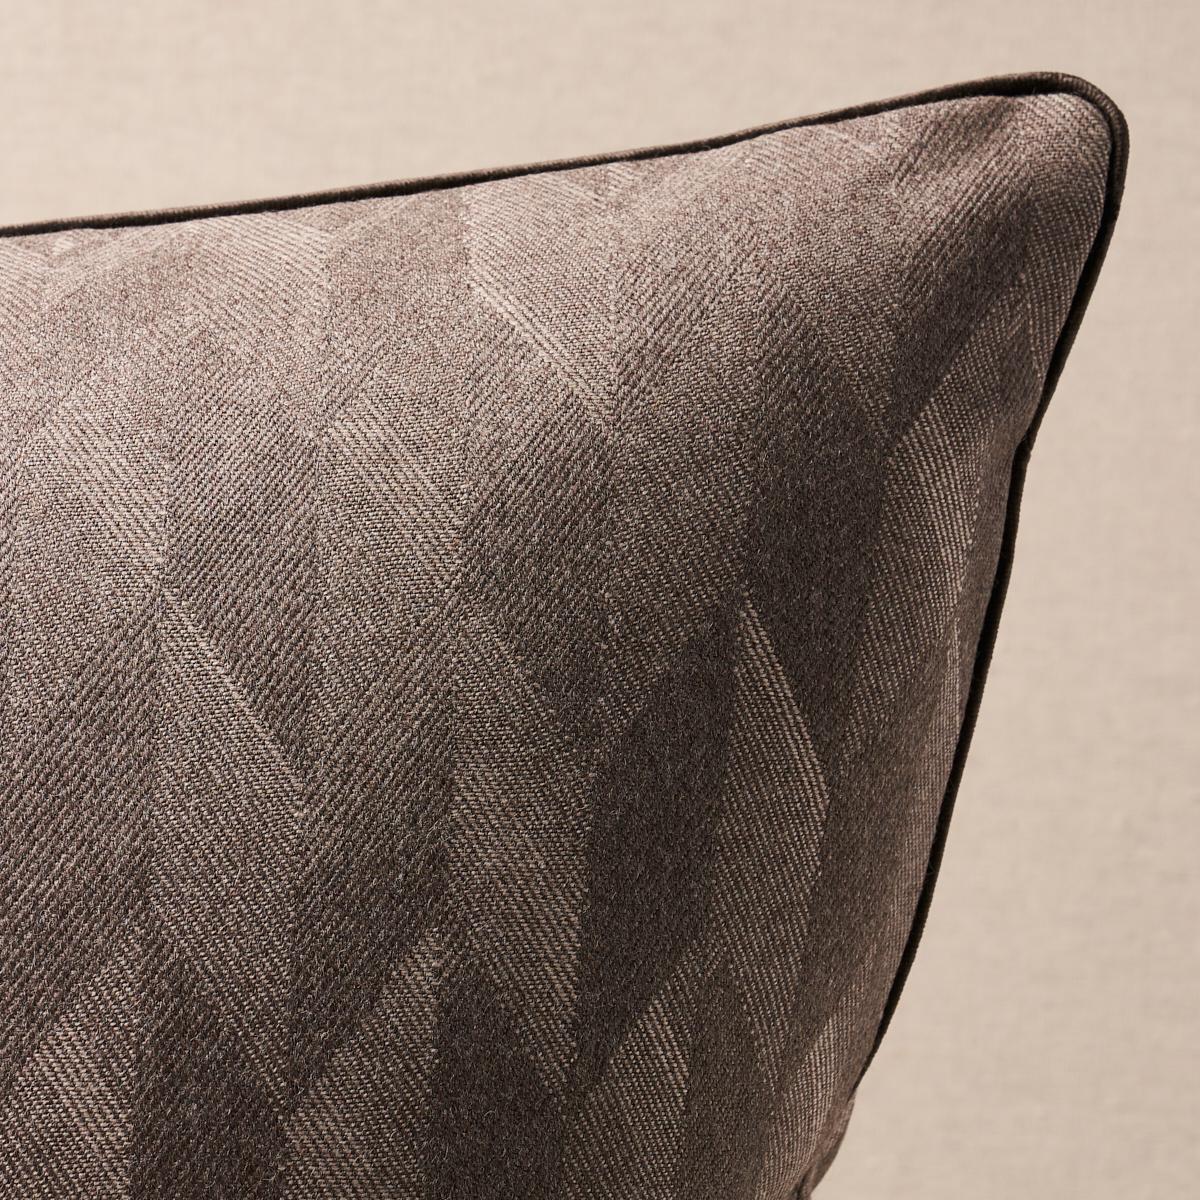 This pillow features Ezra Wool. A soft, textural weave, Ezra Wool in basalt features a subtle allover chevron pattern with a sophisticated tailored aesthetic. Pillow is finished with a welt in Sophia Velvet fabric. Welt content: 39% modal viscose,